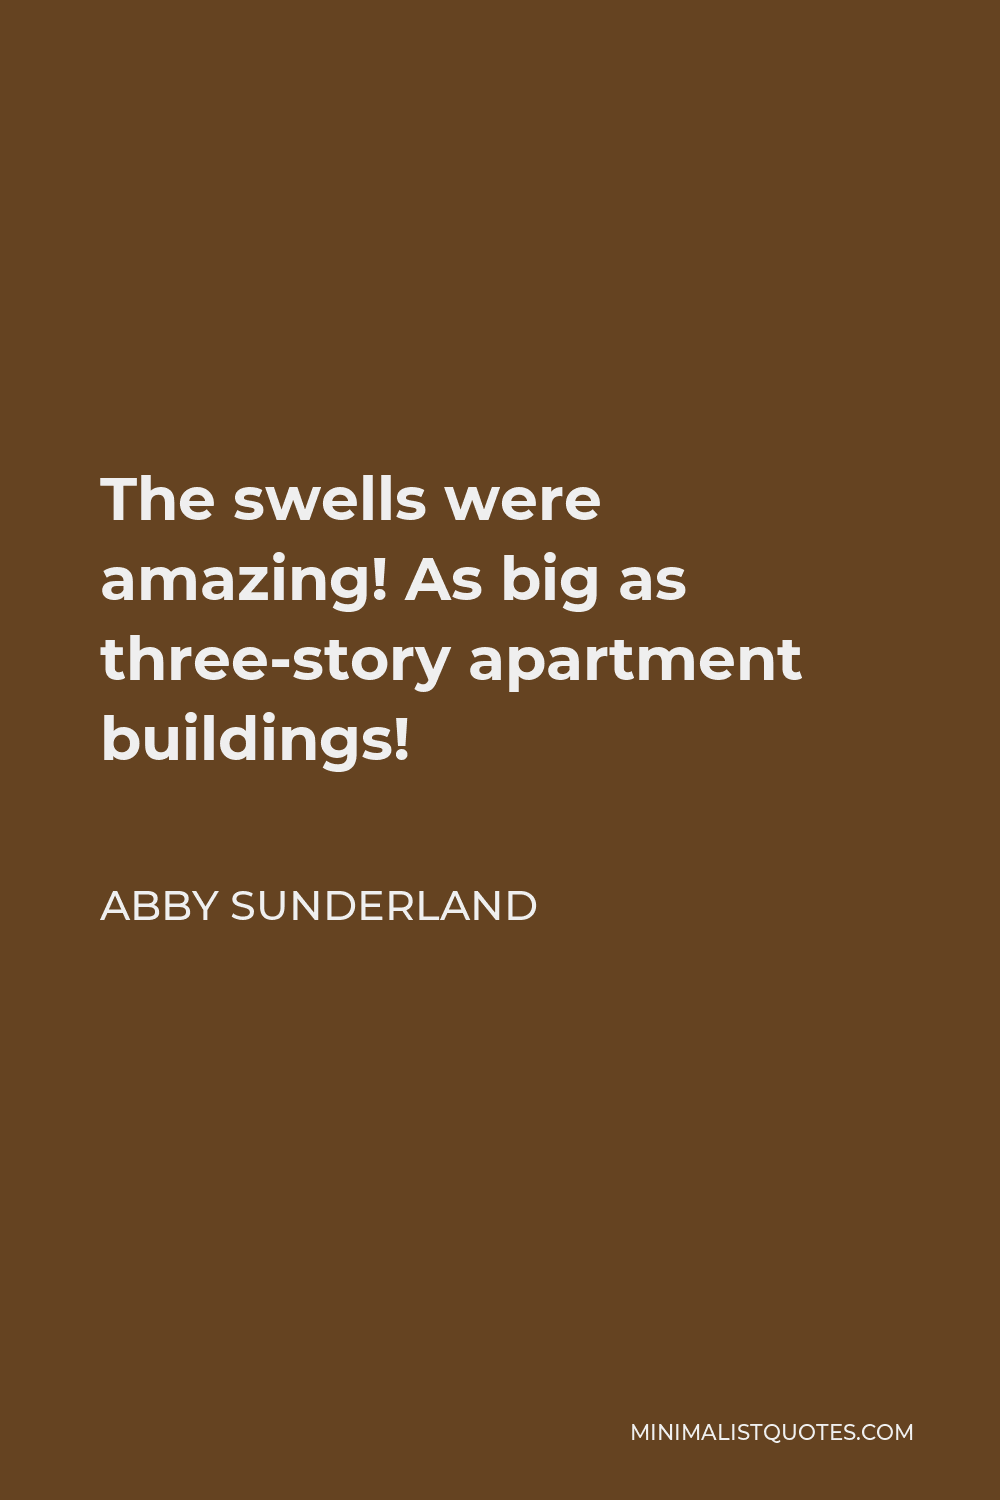 Abby Sunderland Quote - The swells were amazing! As big as three-story apartment buildings!